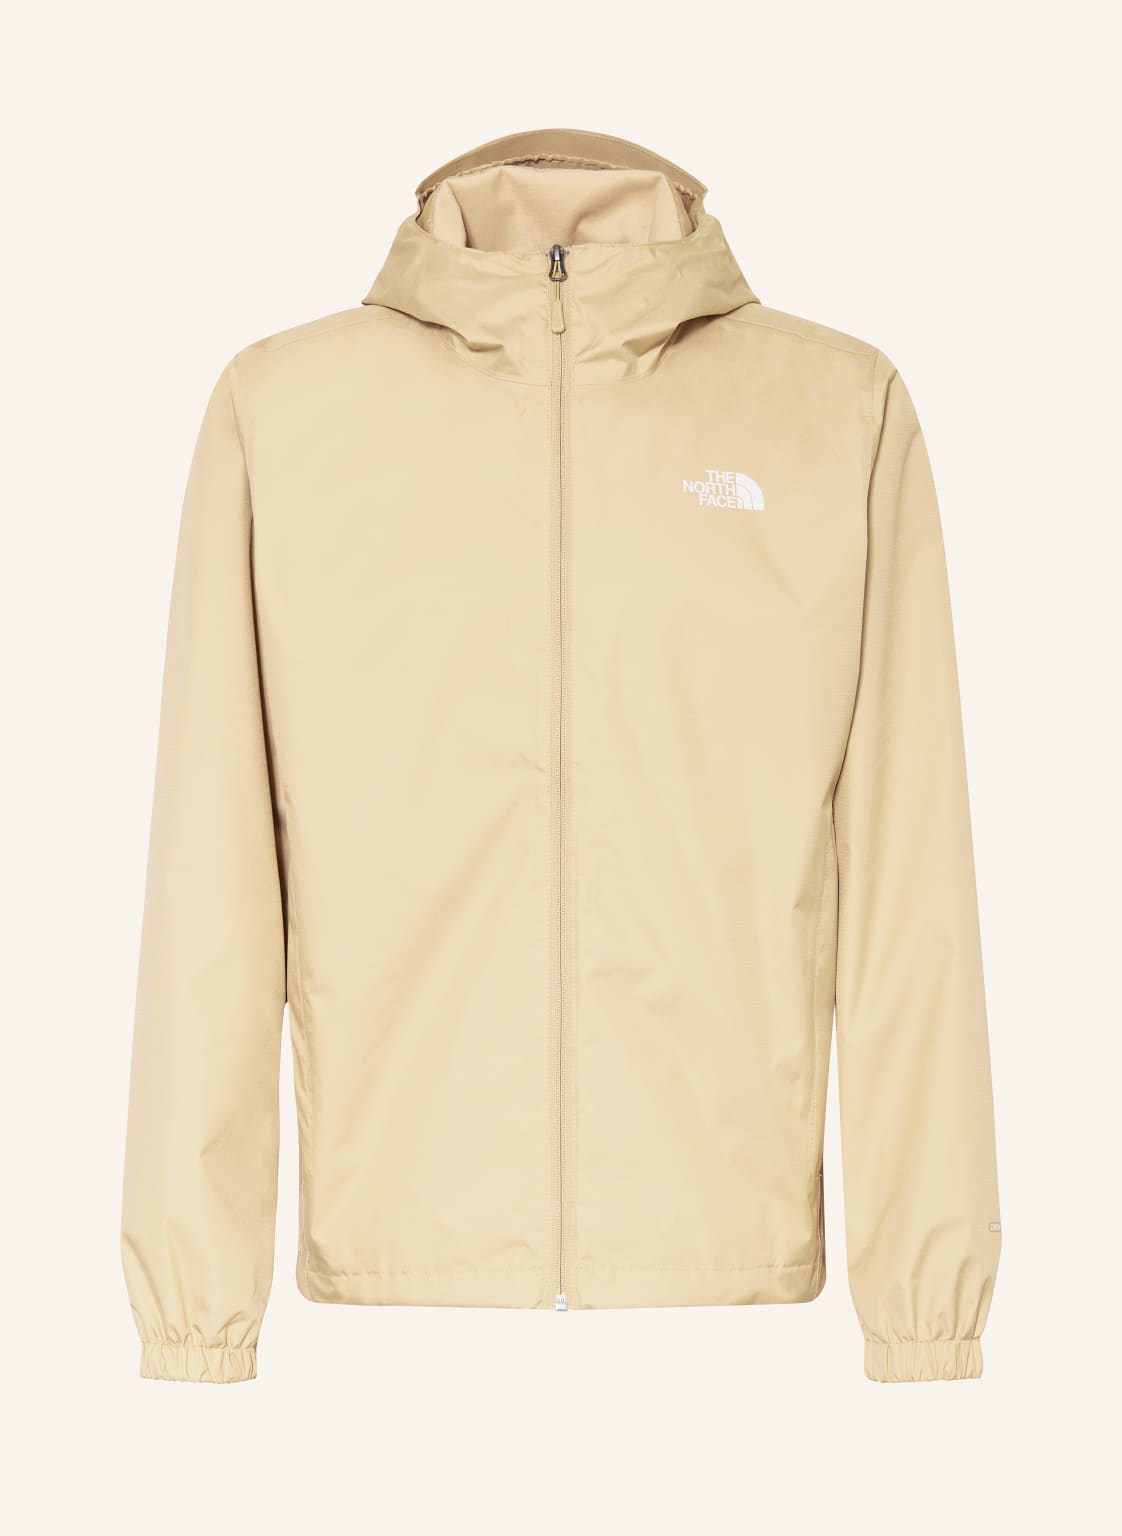 The North Face Funktionsjacke Quest beige von The North Face